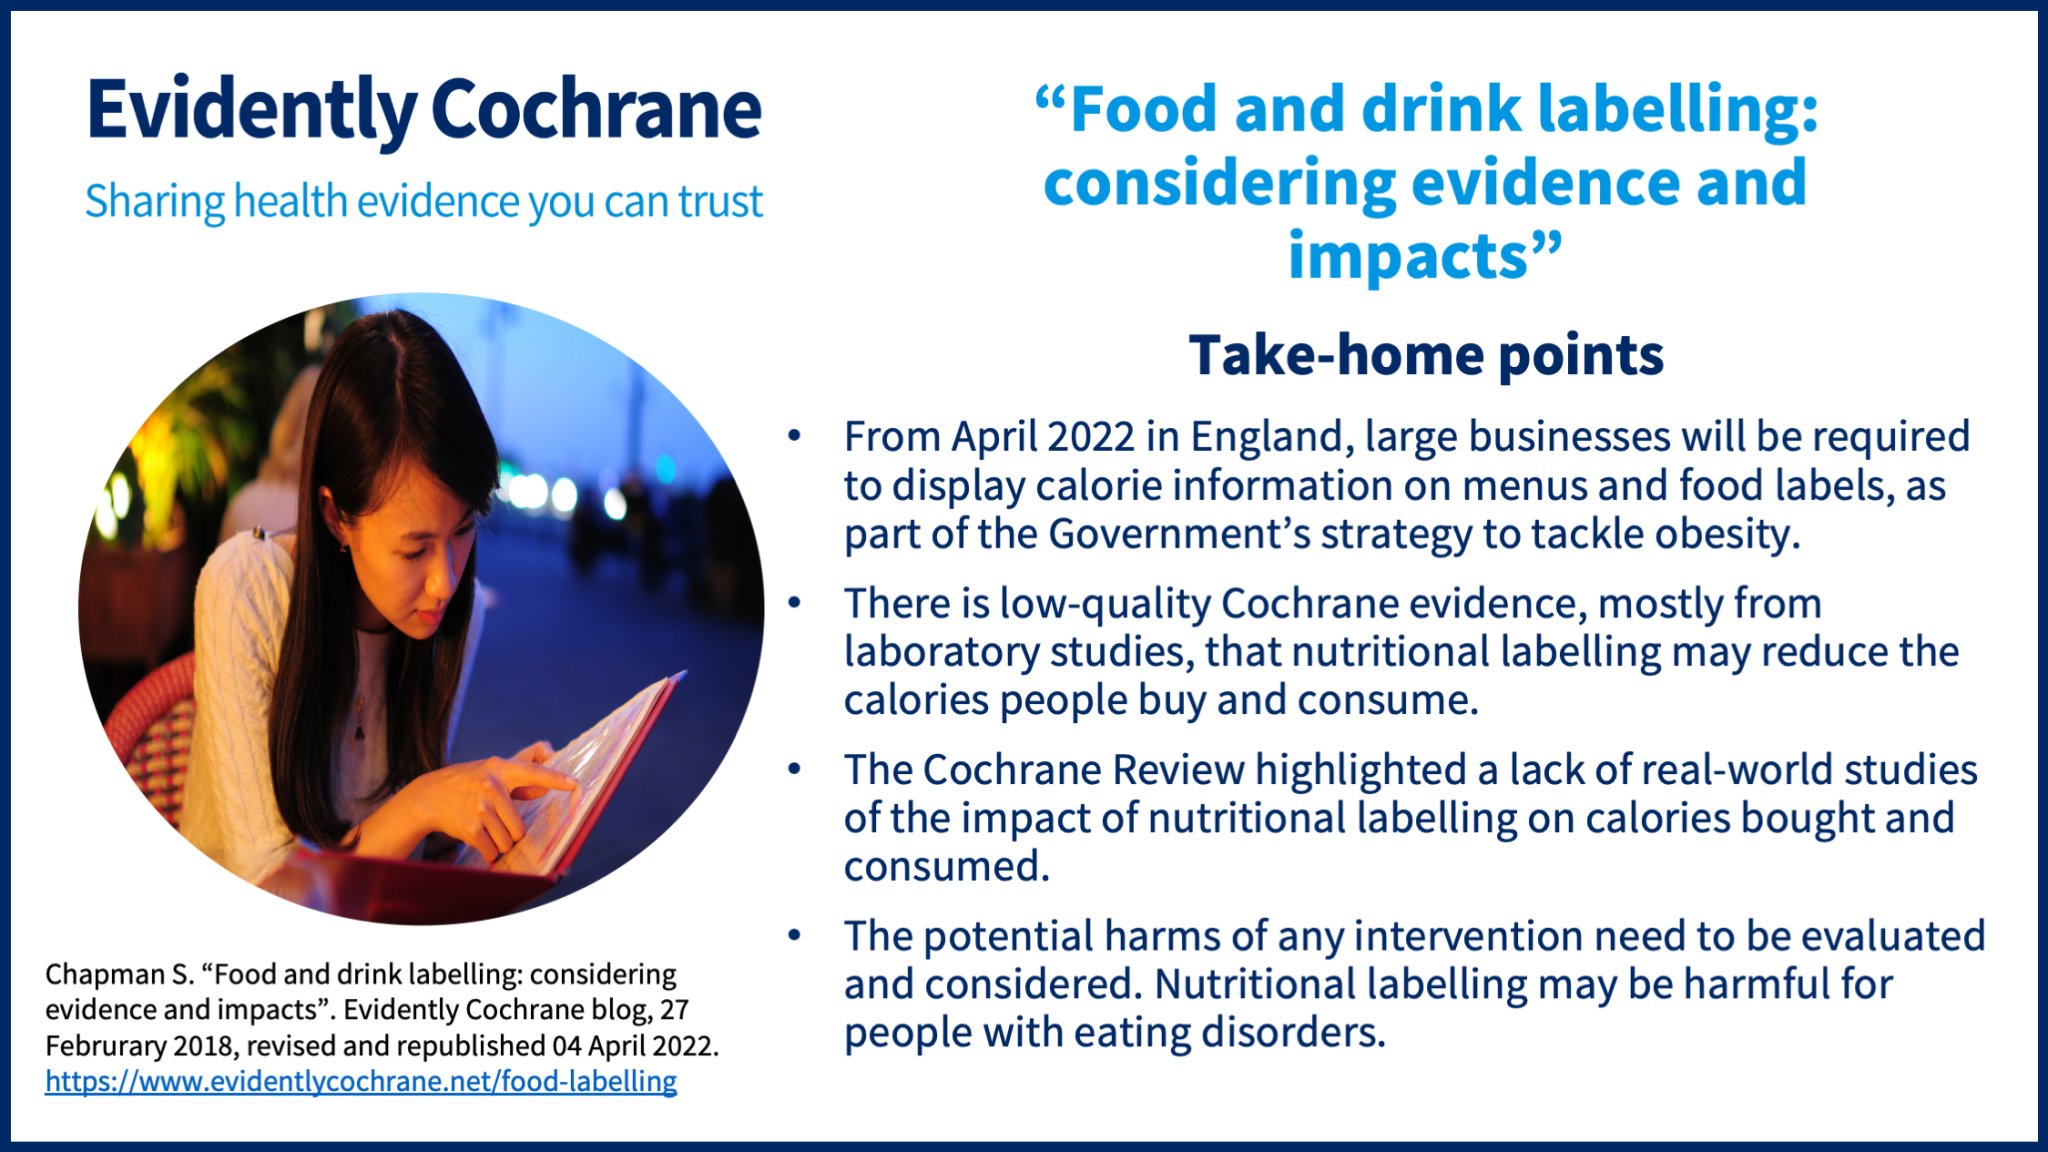 •From April 2022 in England, large businesses will be required to display calorie information on menus and food labels, as part of the Government’s strategy to tackle obesity. •There is low-quality Cochrane evidence, mostly from laboratory studies, that nutritional labelling may reduce the calories people buy and consume. •The Cochrane Review highlighted a lack of real-world studies of the impact of nutritional labelling on calories bought and consumed. •The potential harms of any intervention need to be evaluated and considered. Nutritional labelling may be harmful for people with eating disorders.